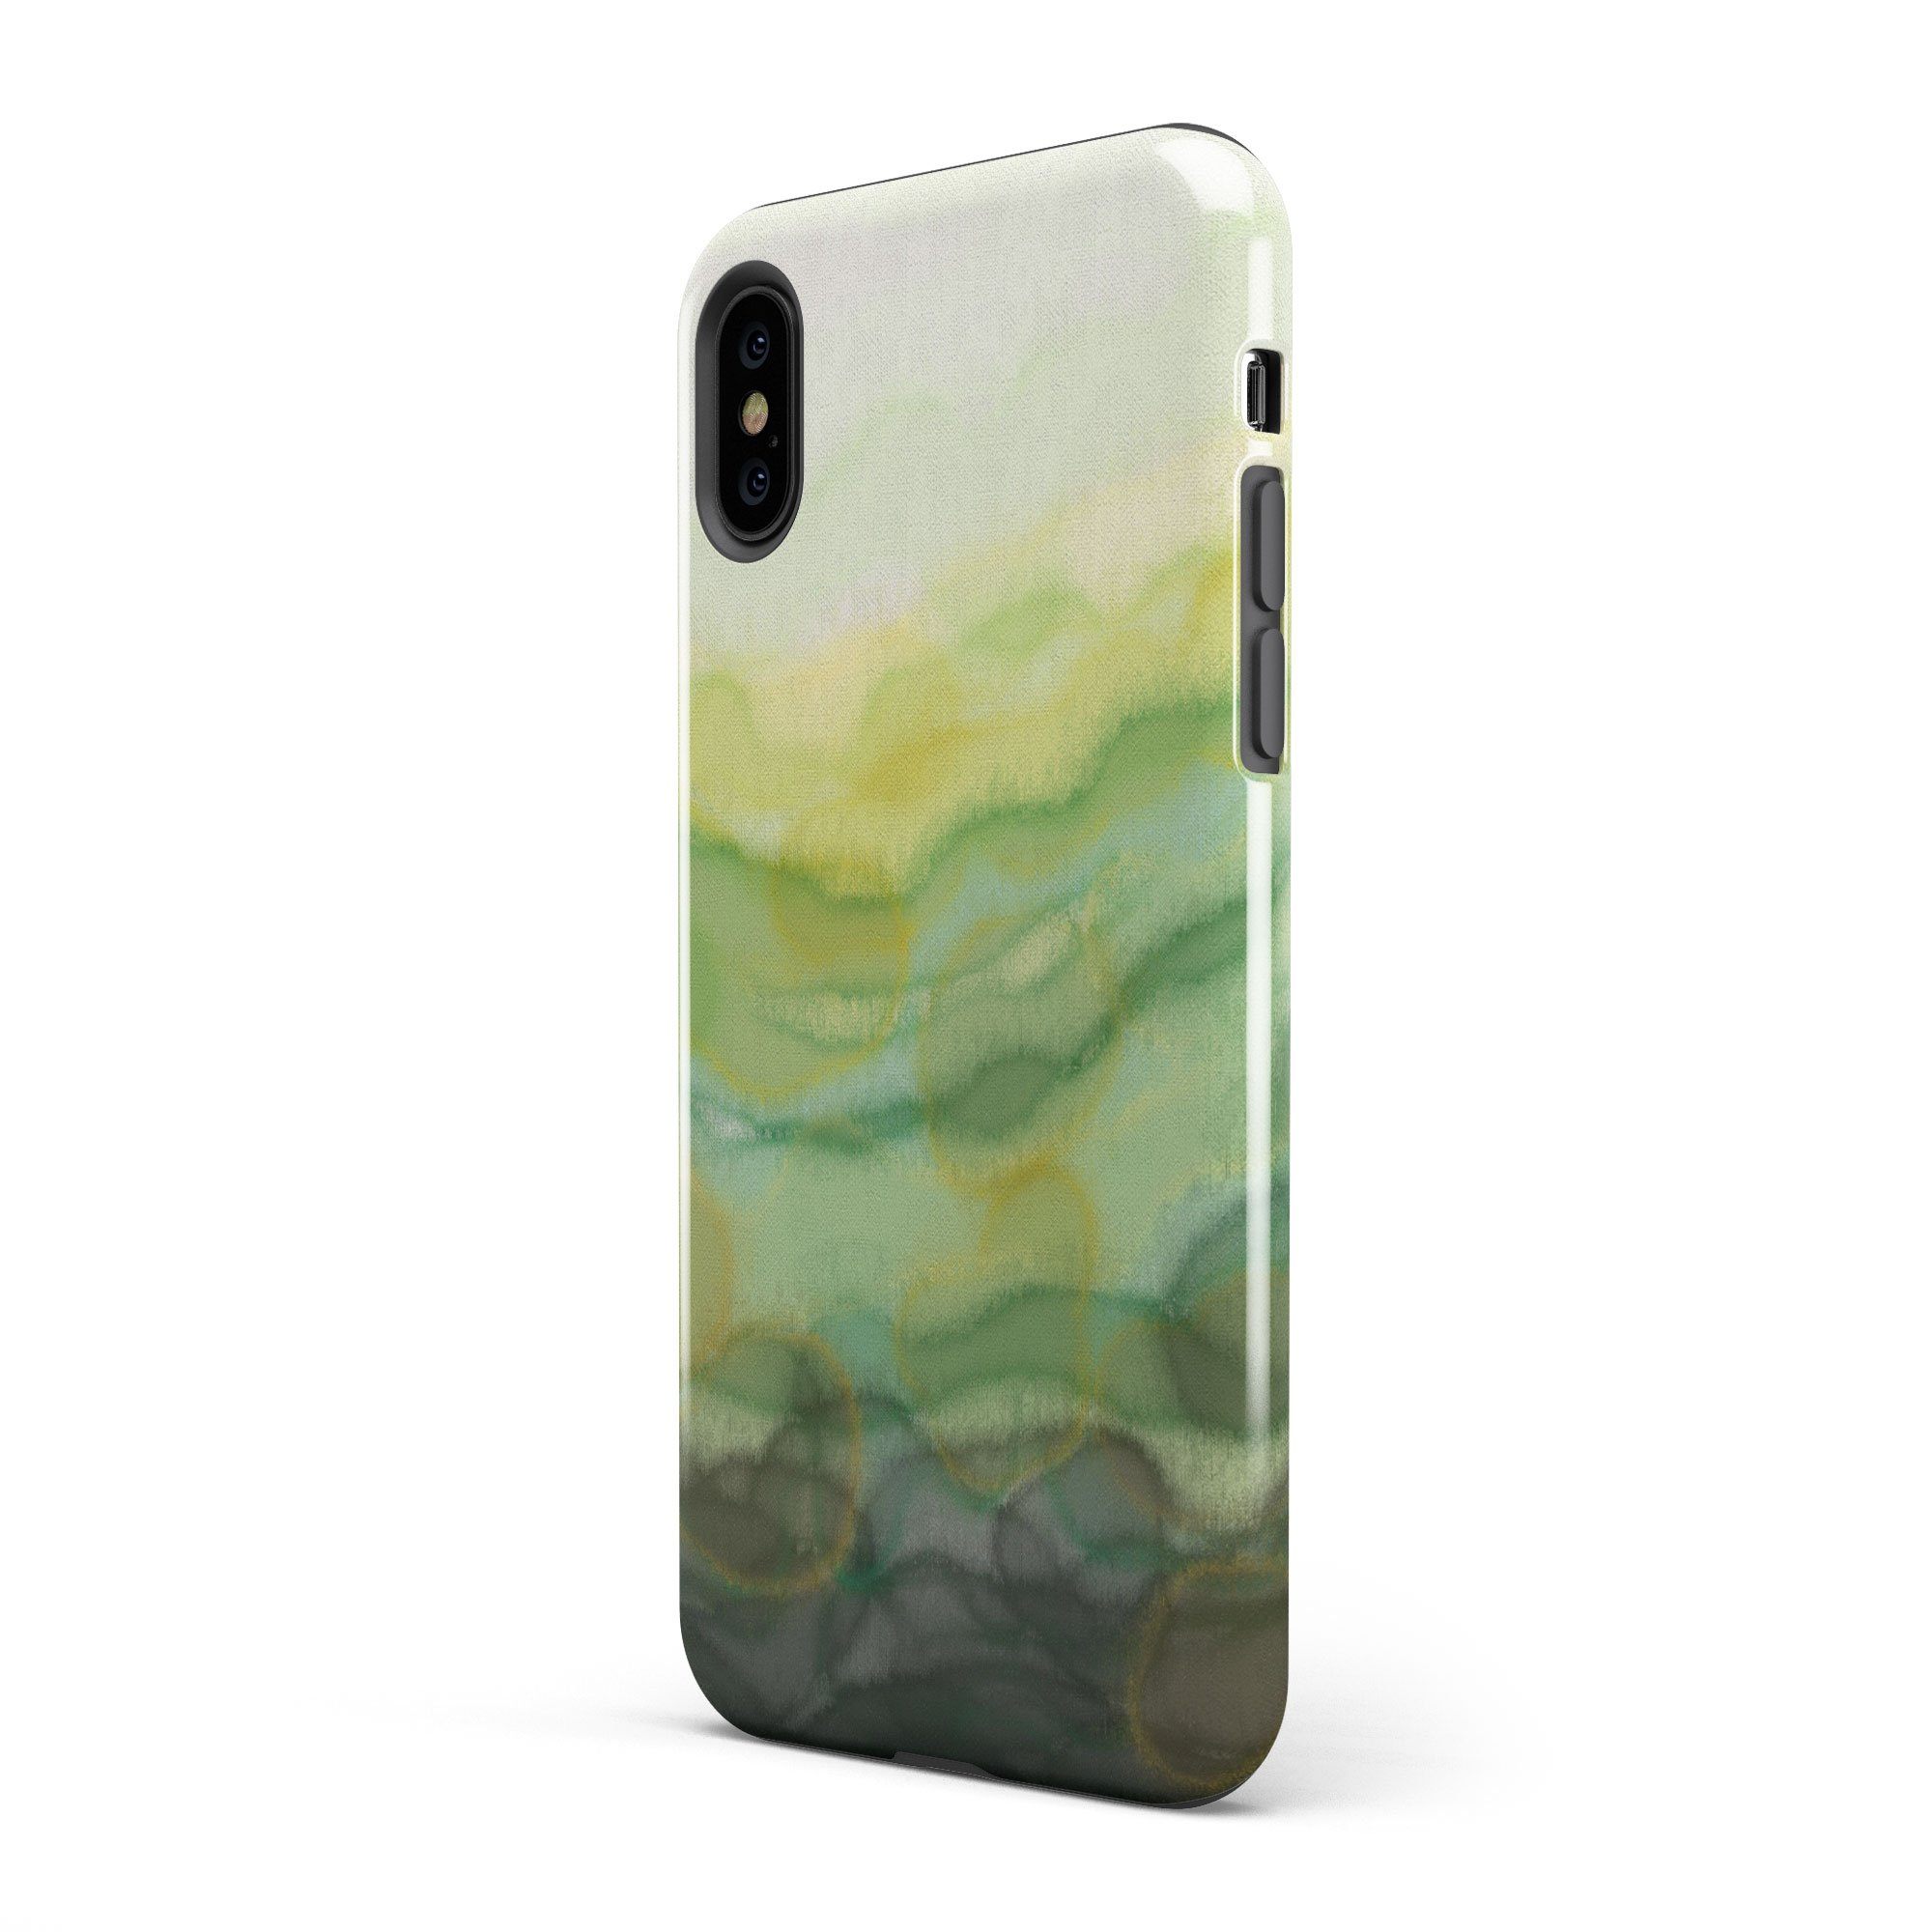 Serenity Green iPhone Case - Louise Mead